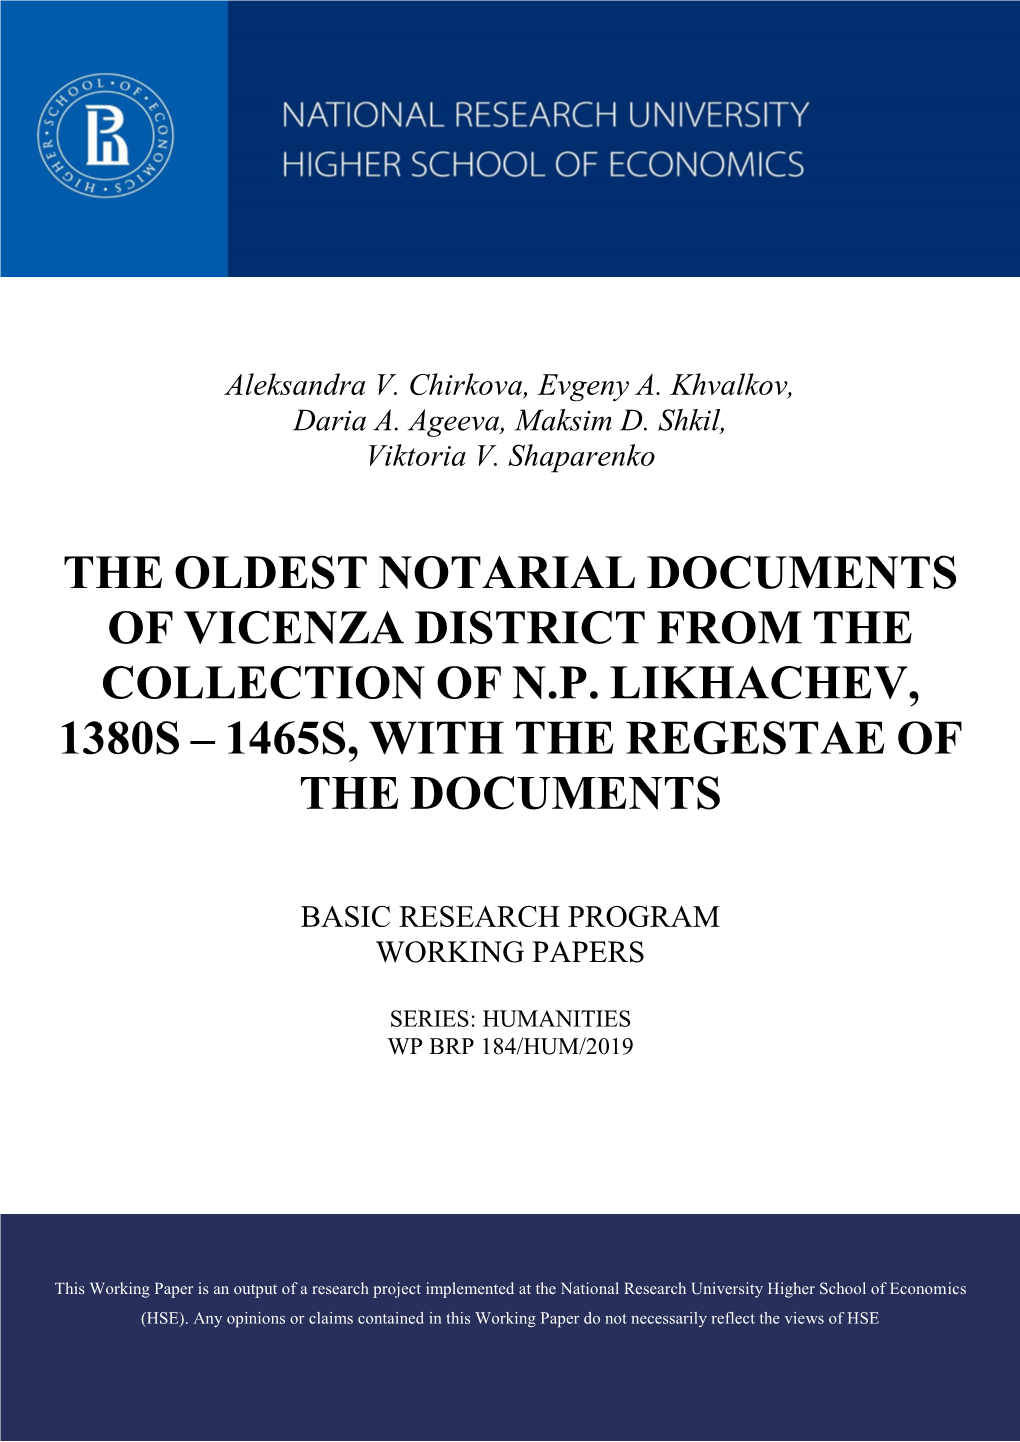 The Oldest Notarial Documents of Vicenza District from the Collection of N.P